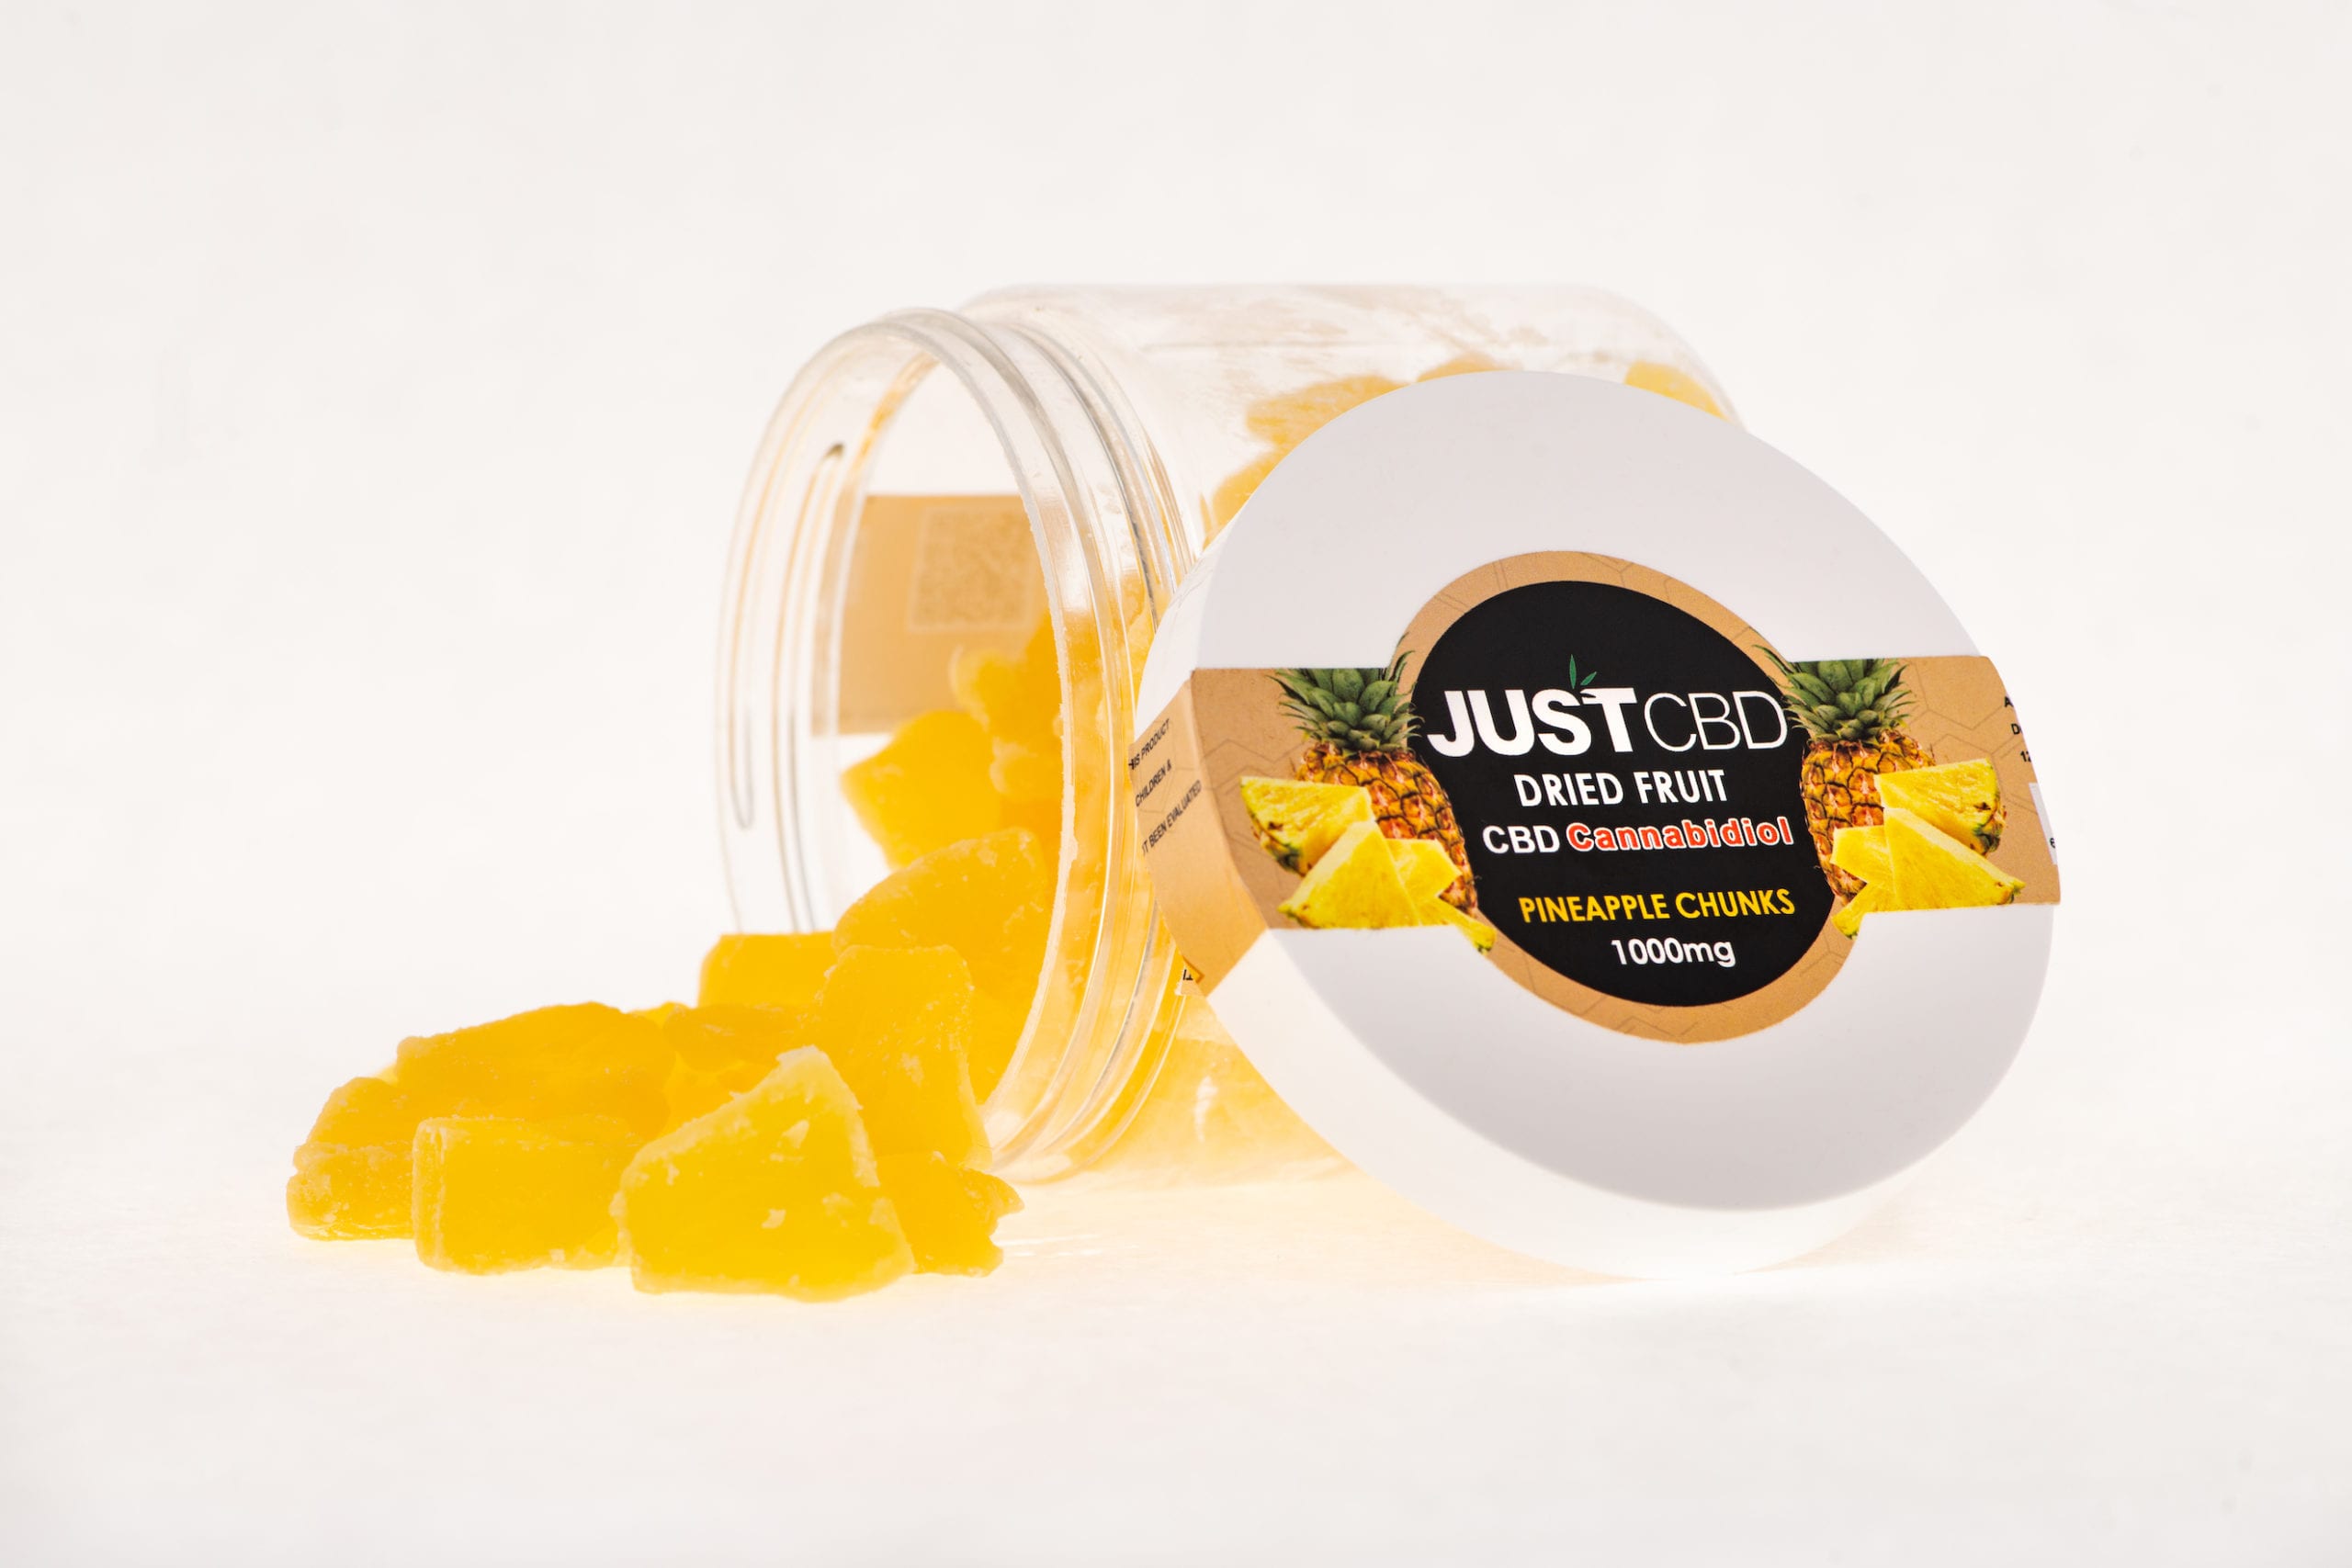 JustCBD Product Photography and JustCBD Products